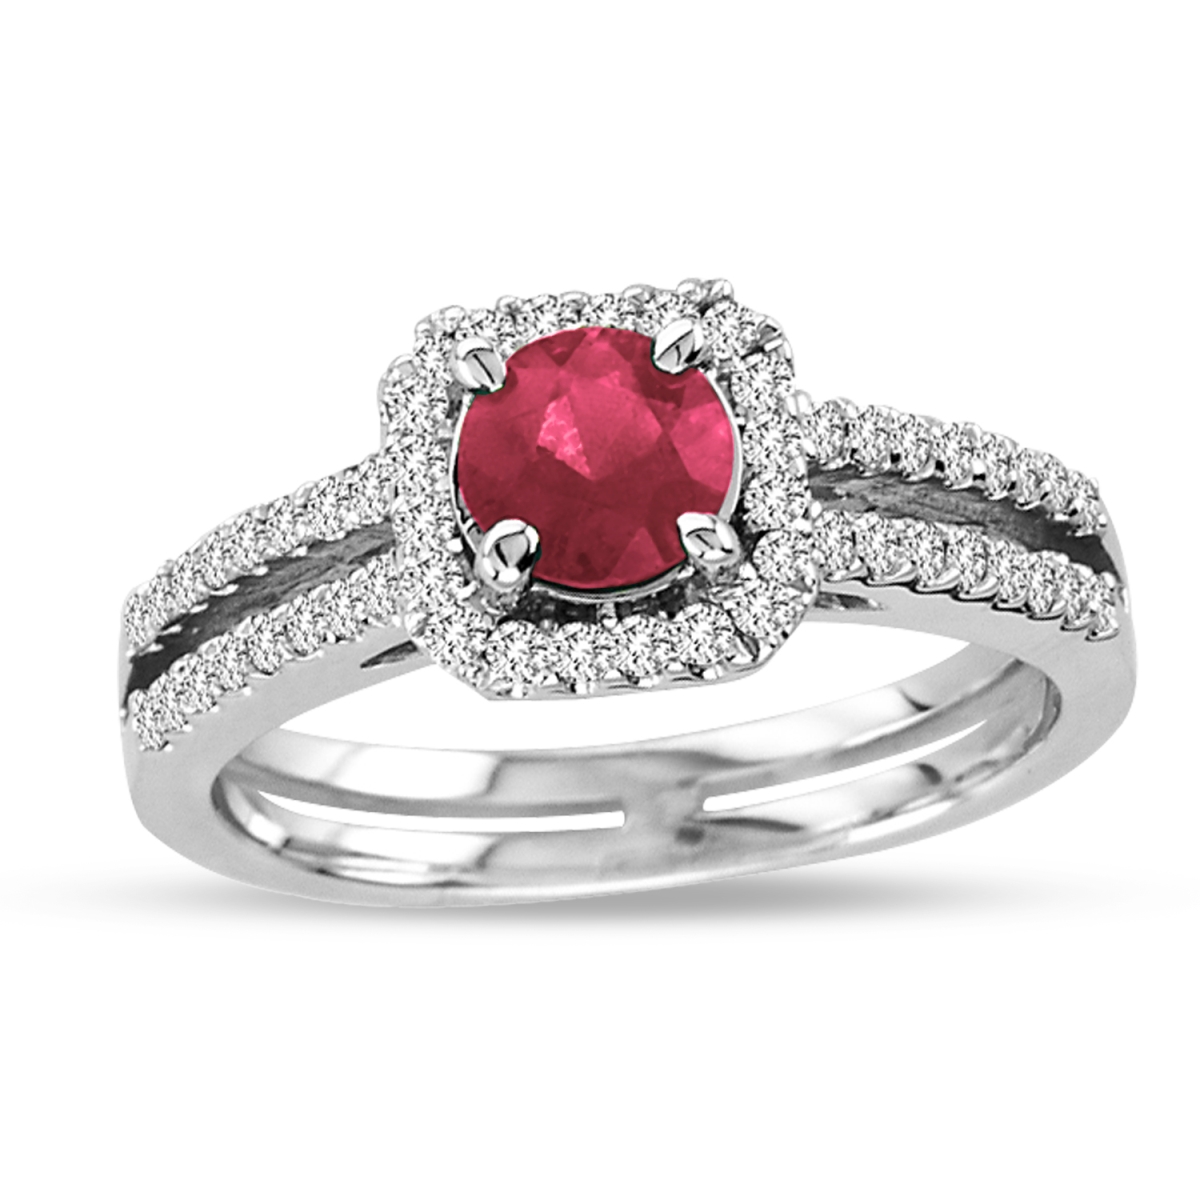 Picture of Louis Creations RL1140RD-4 14K Gold Ring with 0.75 CT Natural Heated Ruby & 0.40 CTTW of Round Diamonds Rings - Size 4